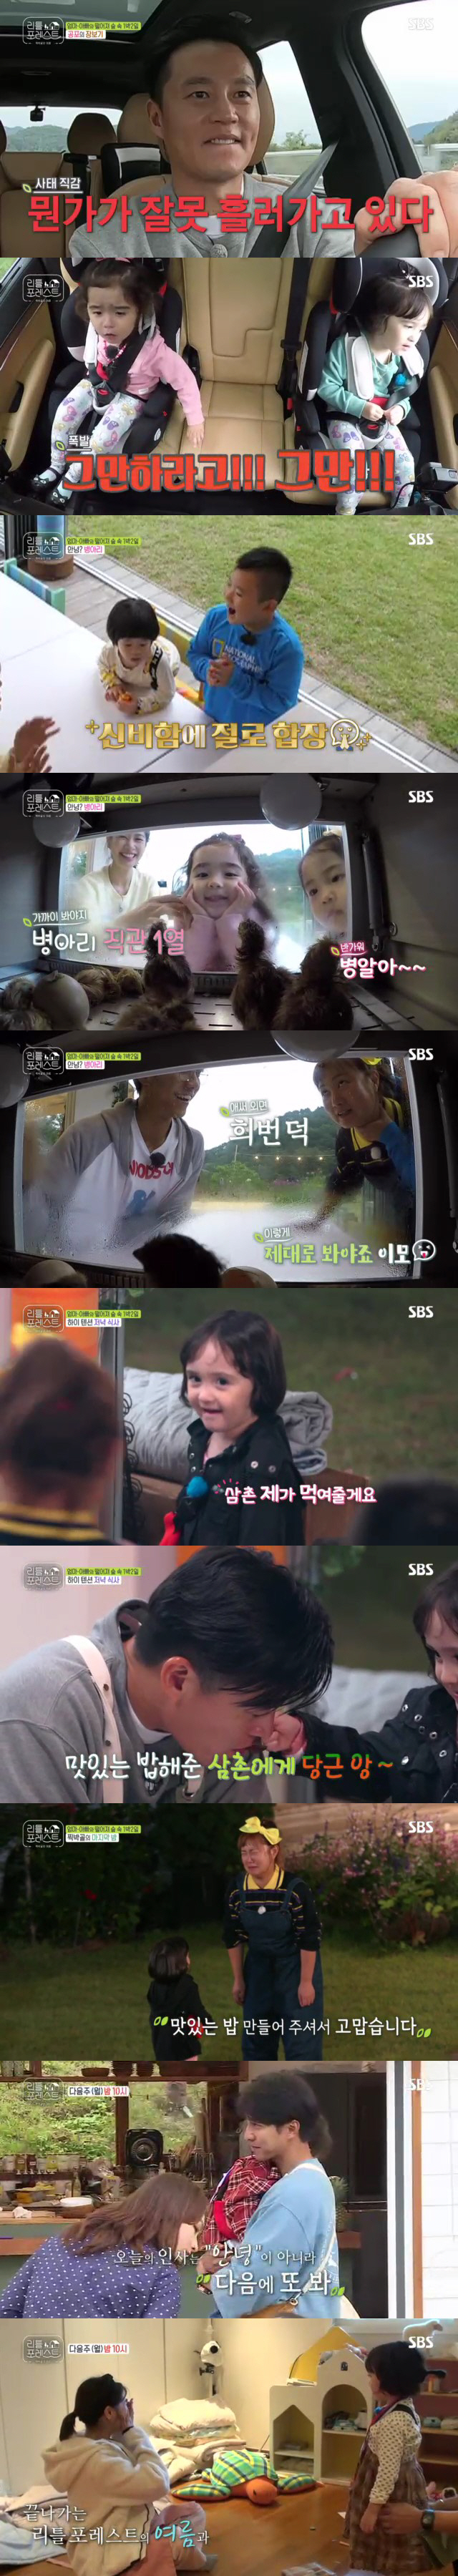 Iron Chef America The Uncle Lee Seo-jin, who was in love with Little Forest children, became the best one minute.In SBS Little Forest broadcast on the last day, Lee Seo-jin, Lee Seung-gi, Park Na-rae and Jung So-min were preparing for a farewell with Little.The members were prepared for the last filming with Little.Lee Seung-gi brought in an egg hatchet, and Park Na-rae prepared tools to make large soap bubbles.Lee Seo-jin was joined by twin sisters Brooke and Grace at Mart.Before departure, Lee Seo-jin expressed awkwardness in his time and Little, who had his first time, saying, I am awkward when I am with my nephew.Lee Seo-jin then played songs for Brooke and Grace, who liked songs, but the children were embarrassed by Lee Seo-jin, saying they would sing each other.It was not easy to take two children to the market.Brooke and Grace each took Cart one as soon as they arrived at Mart, and Lee Seo-jin was forced to drag two Carts around and shop.Brooke and Grace were also tit-for-tat over Ice cream; eventually Lee Seo-jin even bought an extra Ice cream to soothe the crying Brooke.Littles watched the chick hatch together, Lee Seung-gi said, I didnt think eggs would be life, and I wanted to show them that they were chickens like this.I was surprised, he said, explaining why he came to bring an hatchet.Little was amazed at the scene of the first time, and Grace, in particular, could not leave the hatchet and watched the chicks with a curious expression.Park Na-rae, who came to the hatcher by Lee Hans hand, laughed at the I saw it with his eyes raised in fear.Lee Seo-jin and Park Na-rae created potato pongsim and squid pollack wars for Littleies dinner.However, Little did not eat well because they ate cookies made by Lee Hyun Lee during the day.The Uncle, knowing her aunts heart, Brooke ate alone, then went to the children and said, Give them a meal.Brooke then approached Lee Seo-jin and said, Now Ill feed you.Since then, Brook has also impressed Park Na-rae with Thank you for making my aunt delicious rice.Meanwhile, the members received a video from Brooke and Graces mother while writing a home correspondence for Little.In the video, Brooke and Grace sang agitated, Seojin is The Uncle is Iron Chef America. Eat and give. Eat and eat.I am so happy, he said.The members showed jealousy of Lee Seo-jin when their name did not come out, and Lee Seo-jin laughed and could not hide his joy.Since then, the members have read a long letter from the childrens mother and realized their separation from the soon-to-be children.In the meantime, Lee Seo-jin broke the atmosphere saying, Lets see the video again.The next days meeting continued, but Lee Seo-jin still looked into Brooke and Grace, saying, Lets see the video for a while.In the end, Lee Seung-gi said, Seojin is watching this child. Lee Seo-jin focused on the images of the children with a smiley face with earphones.Lee Seo-jin, who is immersed in childrens song gifts, won the best one minute with a 4.3% audience rating per minute.Meanwhile, at the end of the broadcast, parting with Little Boys was announced.Park Na-rae stole tears from the children, and Jung So-min also gave a tear to those who shed tears at Brookes words, I will be Little Forest aunt when I grow up.